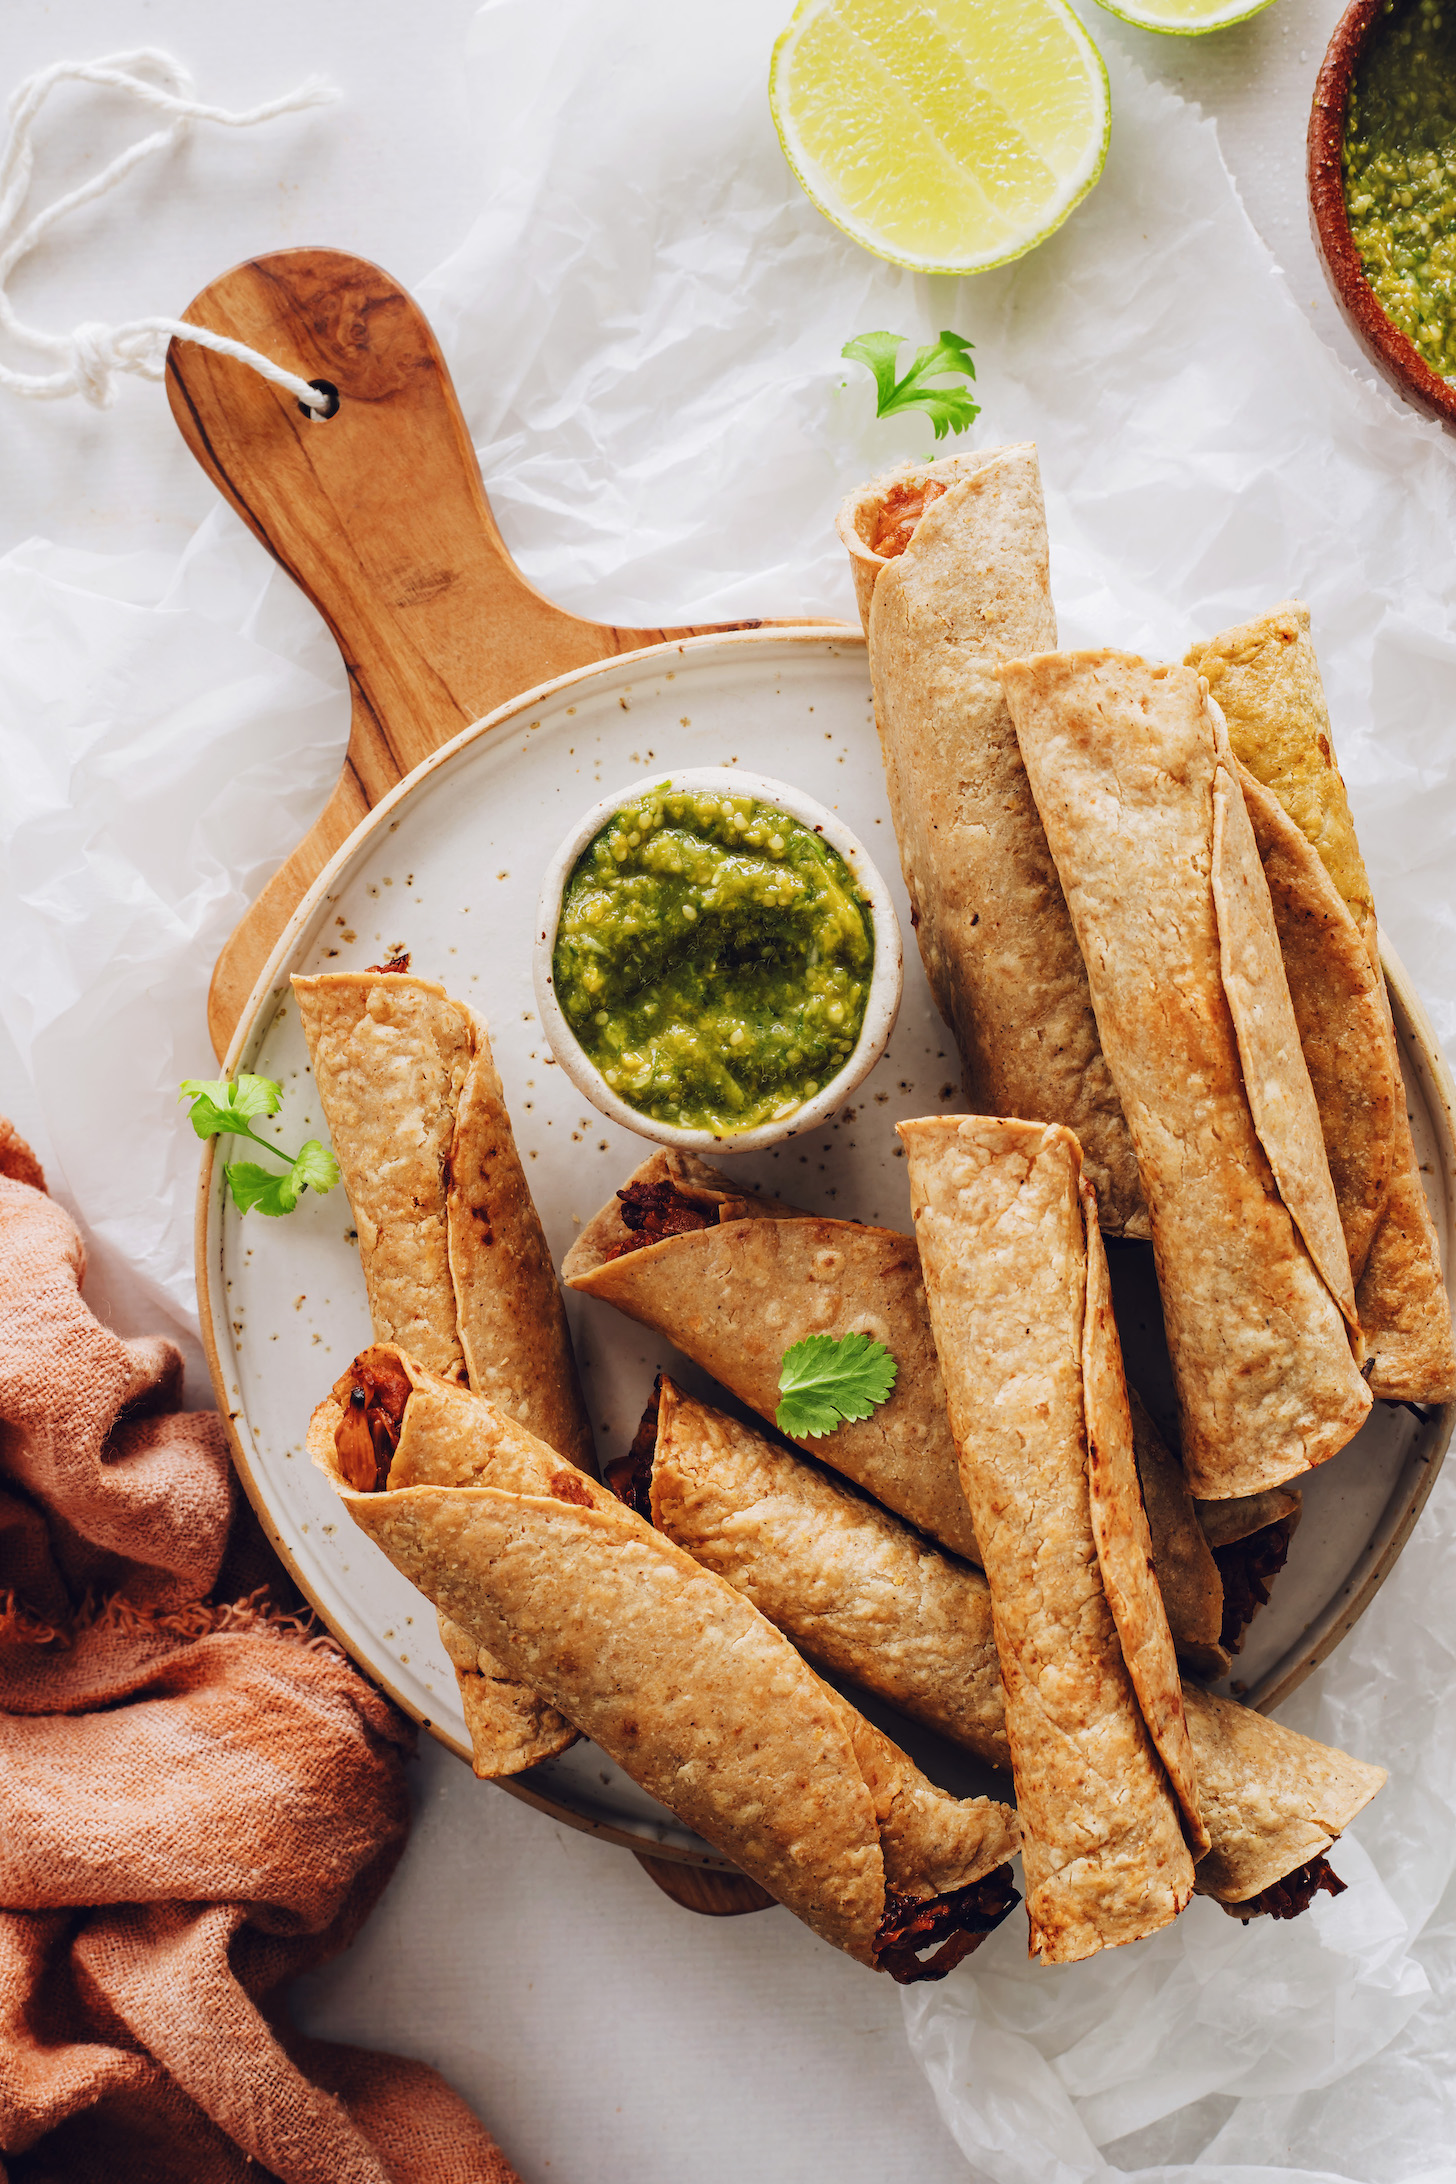 Plate of baked vegan taquitos with a bowl of tomatillo salsa